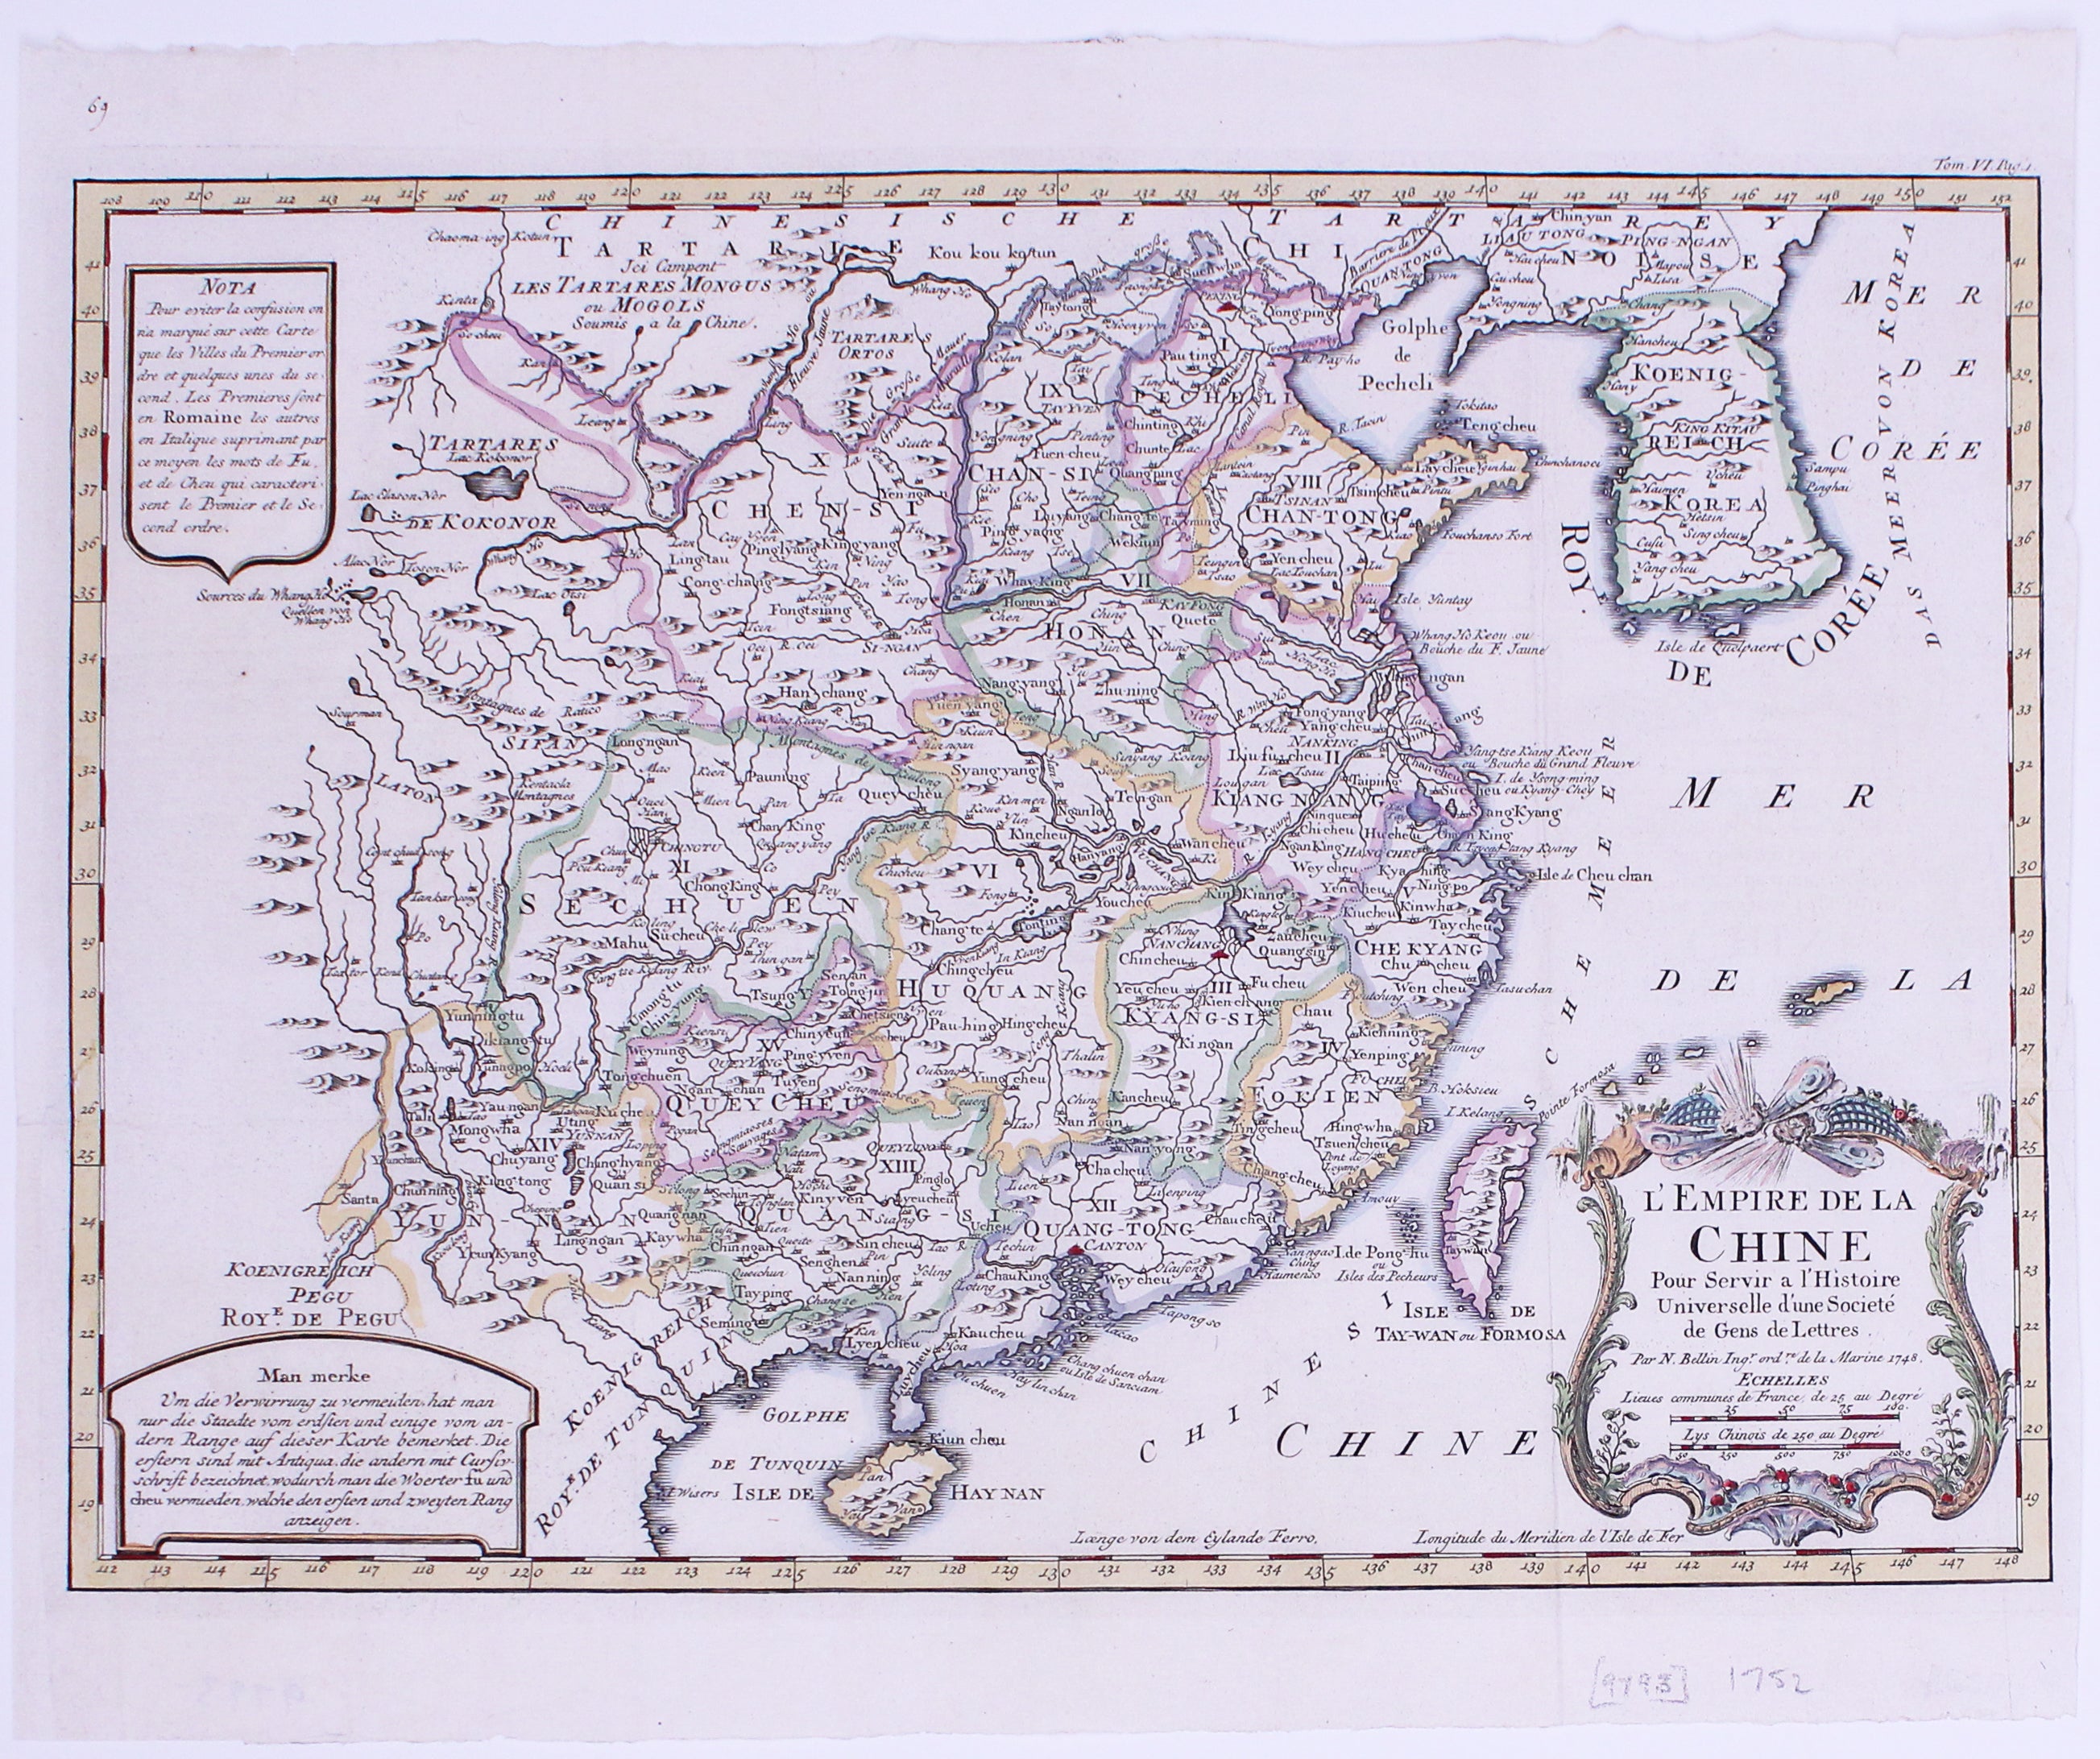 Bellin's Map of China, German Edition